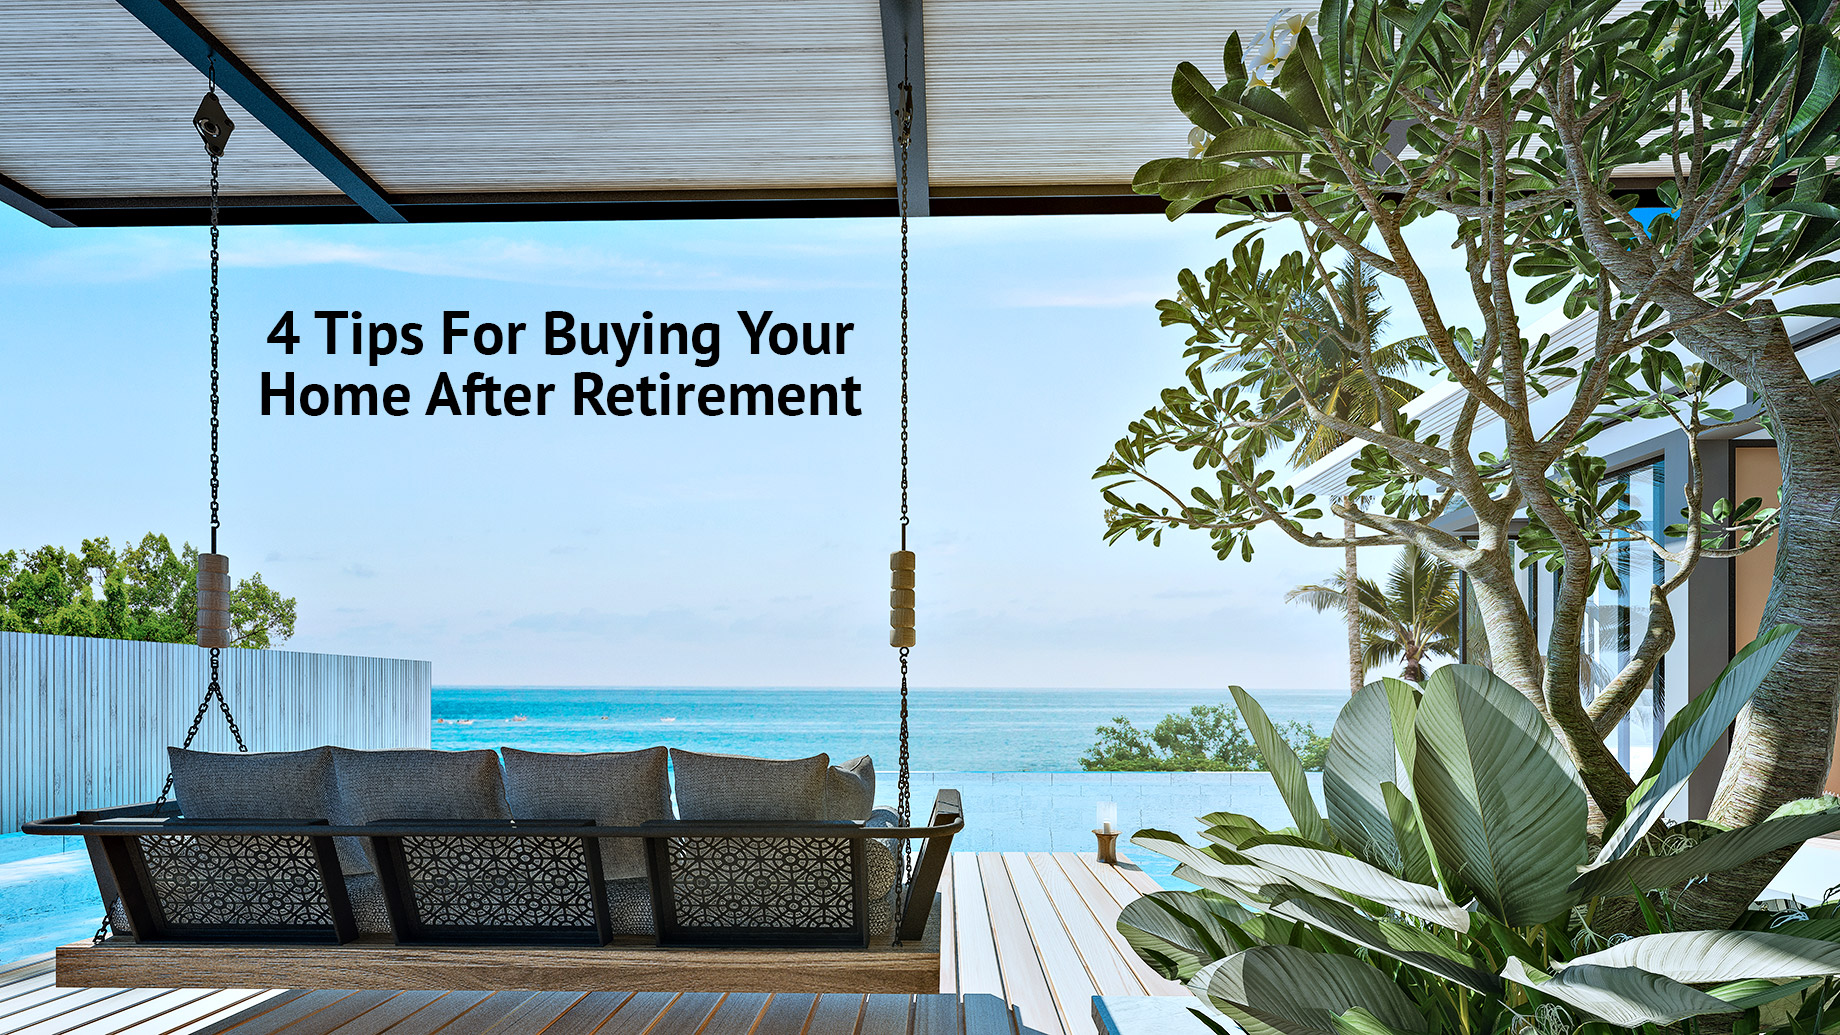 4 Tips For Buying Your Home After Retirement